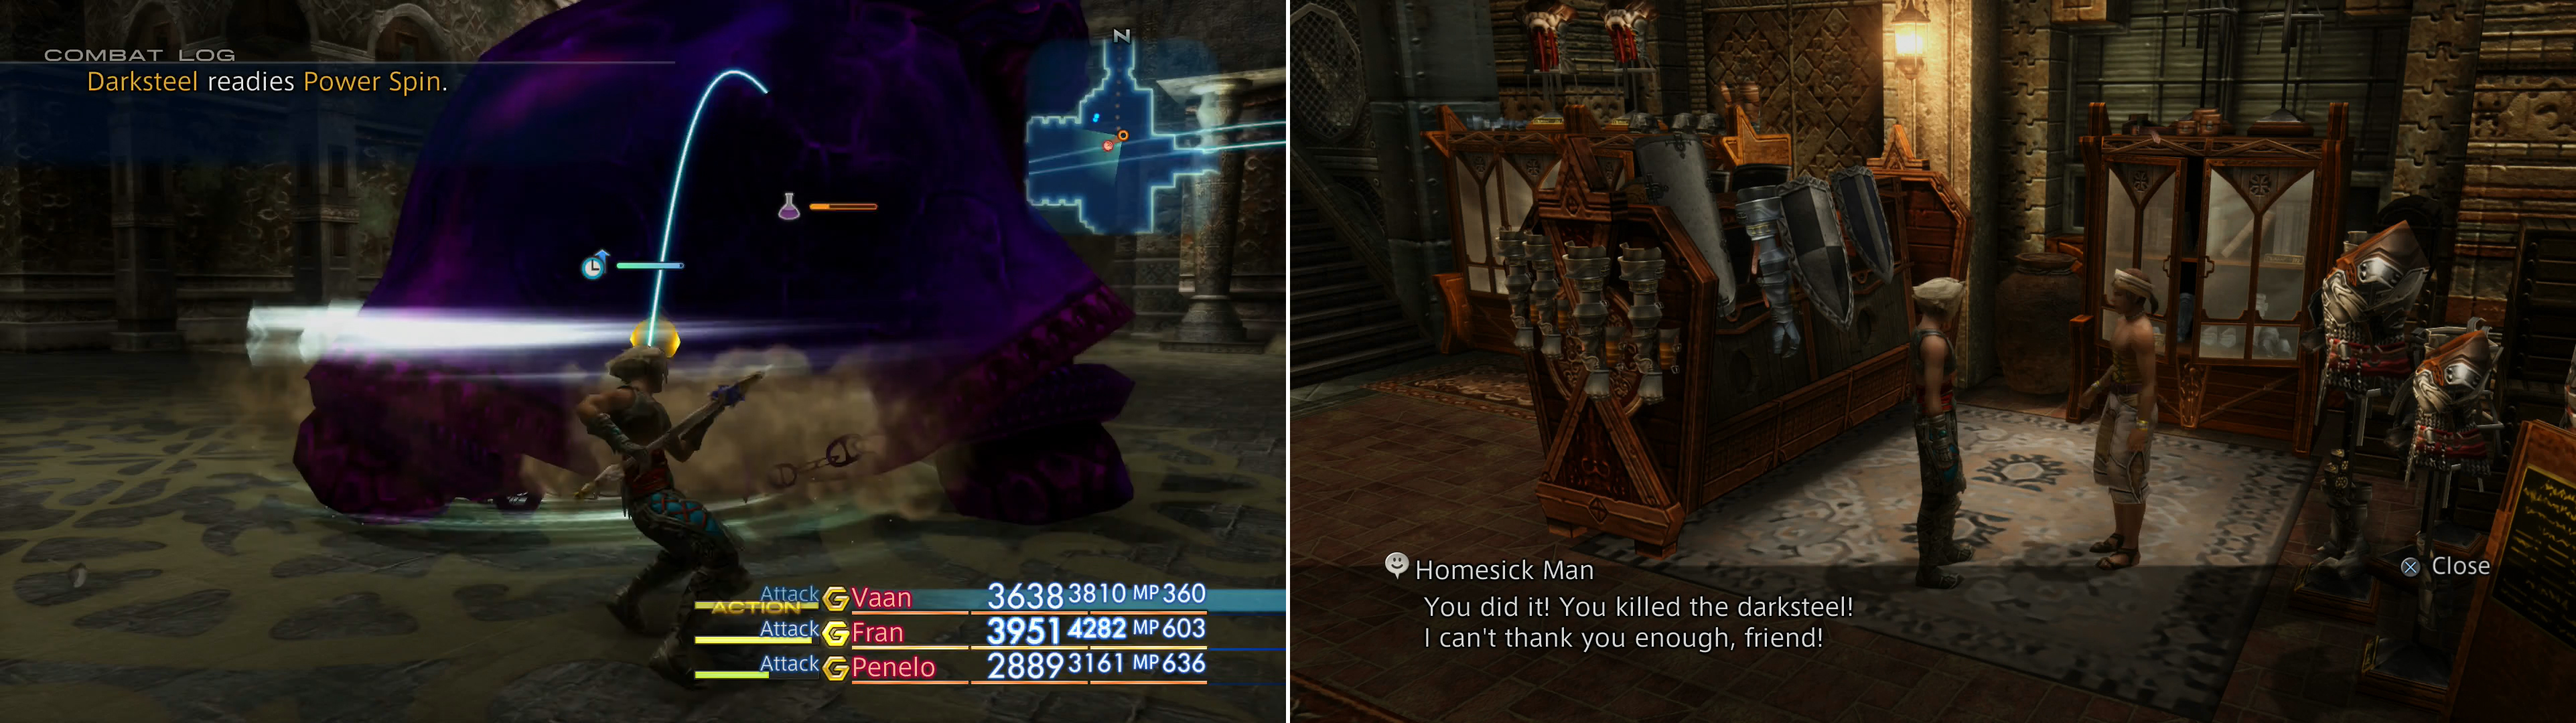 An Uhlan equipped with a Holy Lance can deal massive damage to Darksteel (left). Return to the petitioner after defeating the mark to recieve your reward (right).